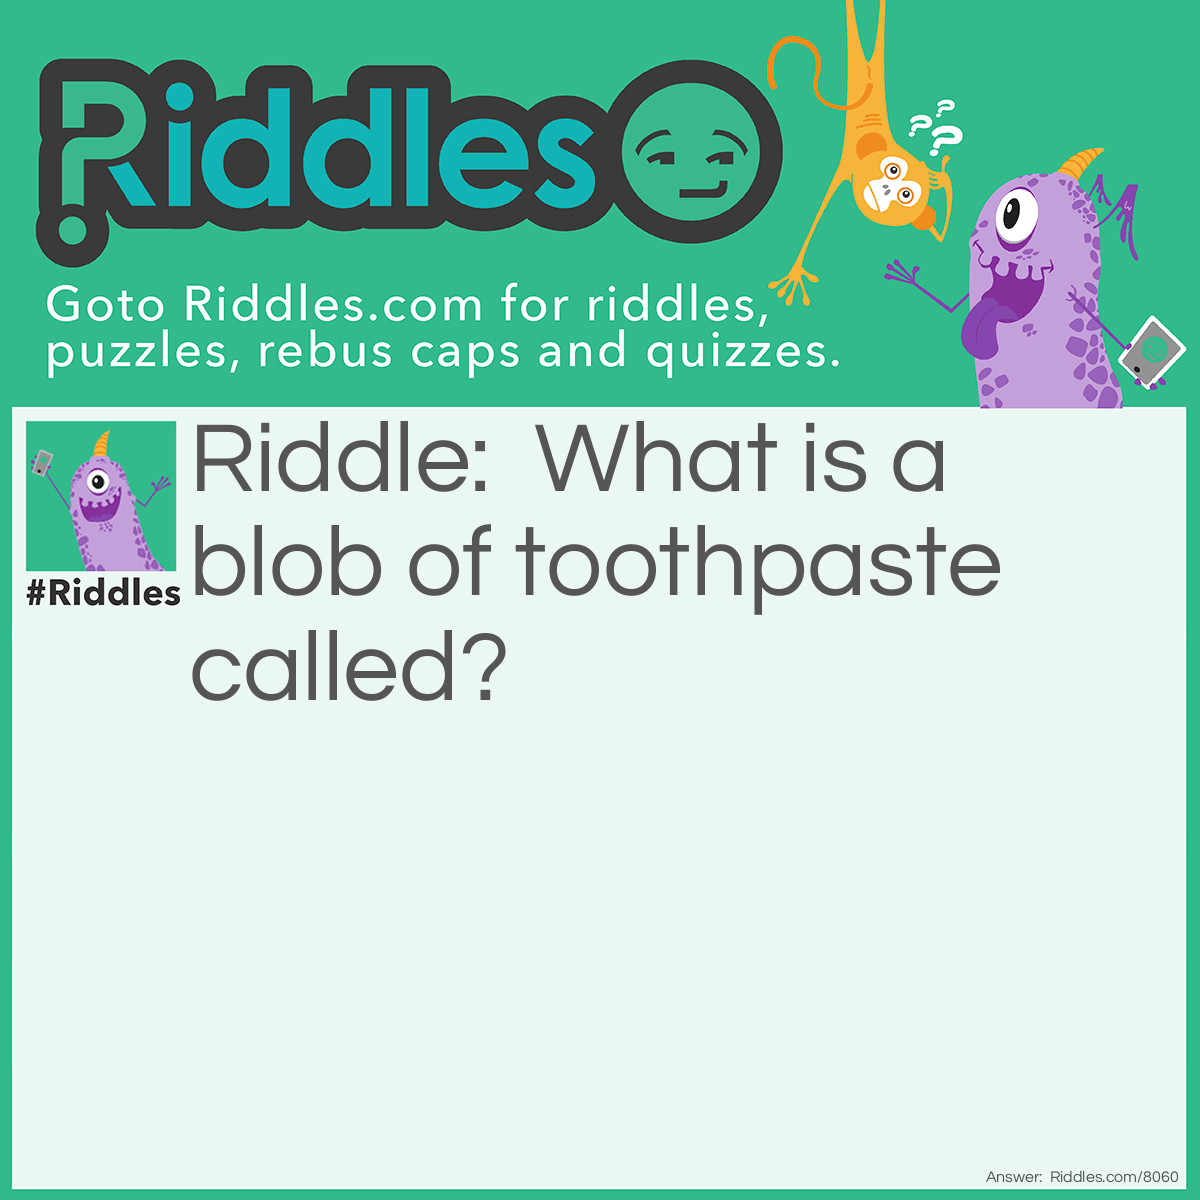 Riddle: What is a blob of toothpaste called? Answer: A nurdle!